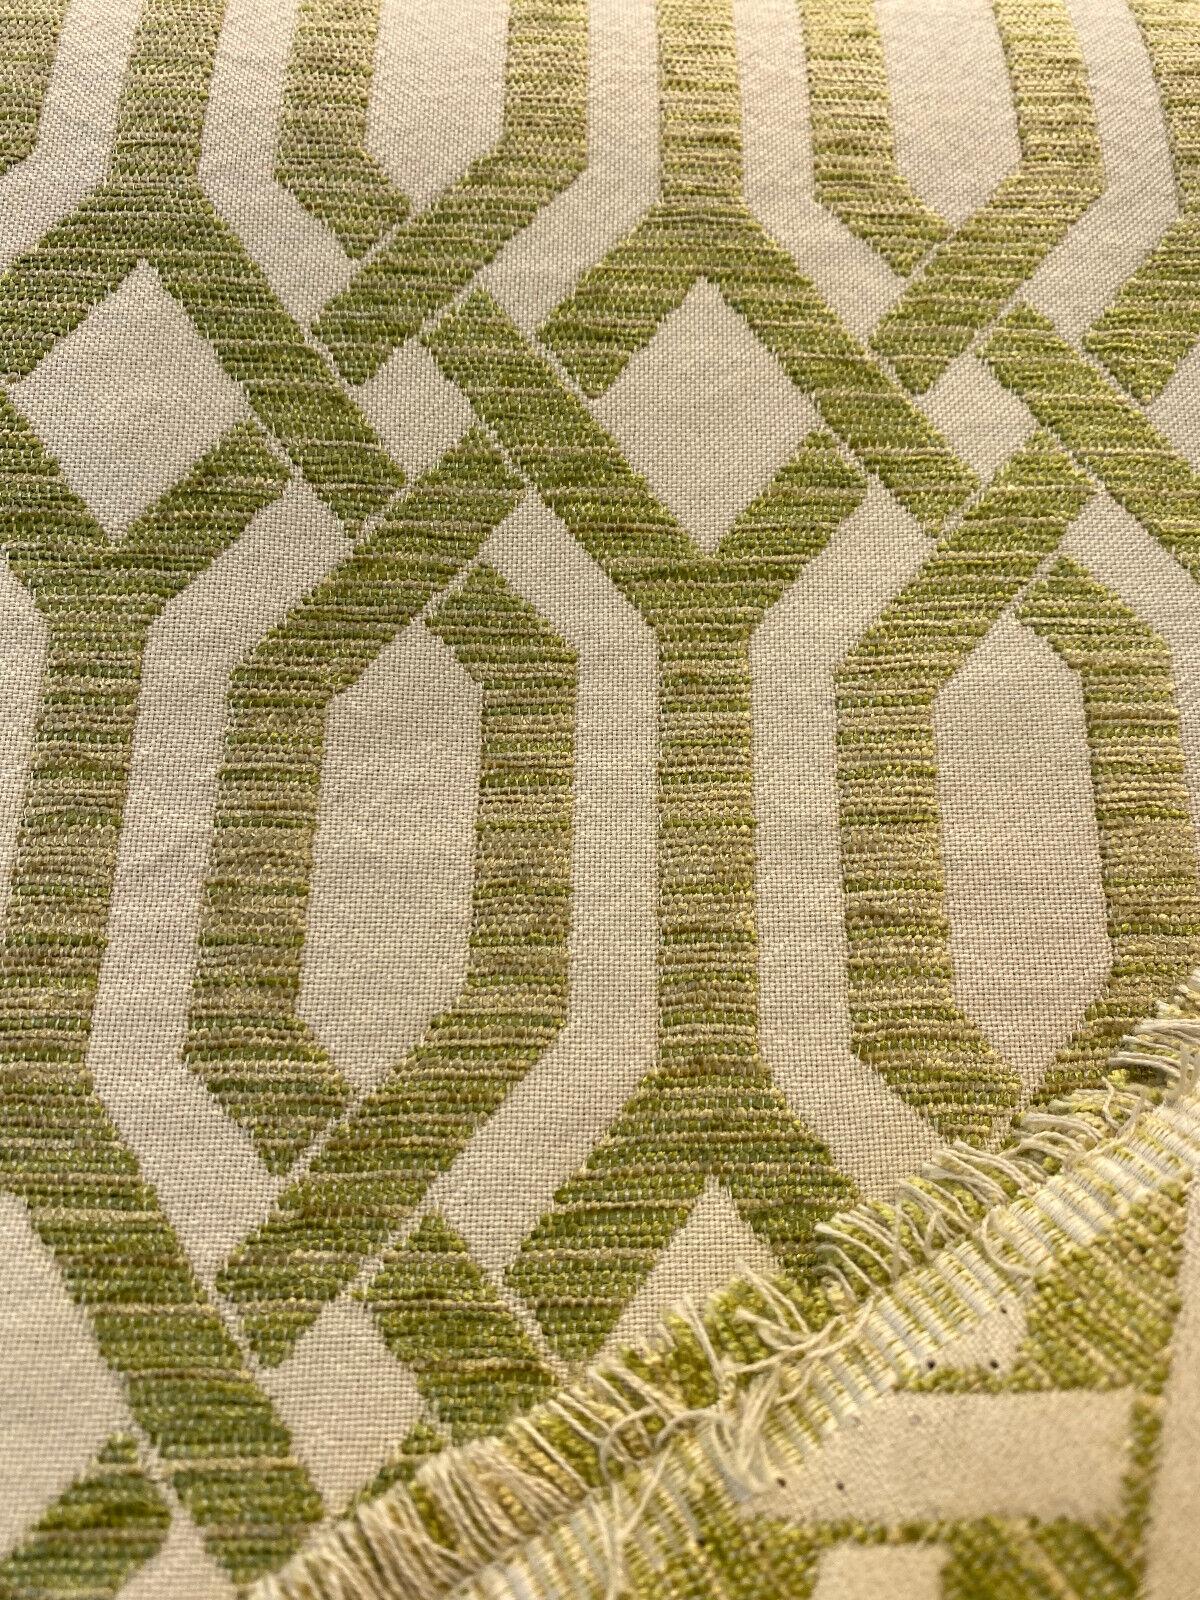 Sava Sweet Grass Green Chenille Upholstery Chenille Fabric By The Yard